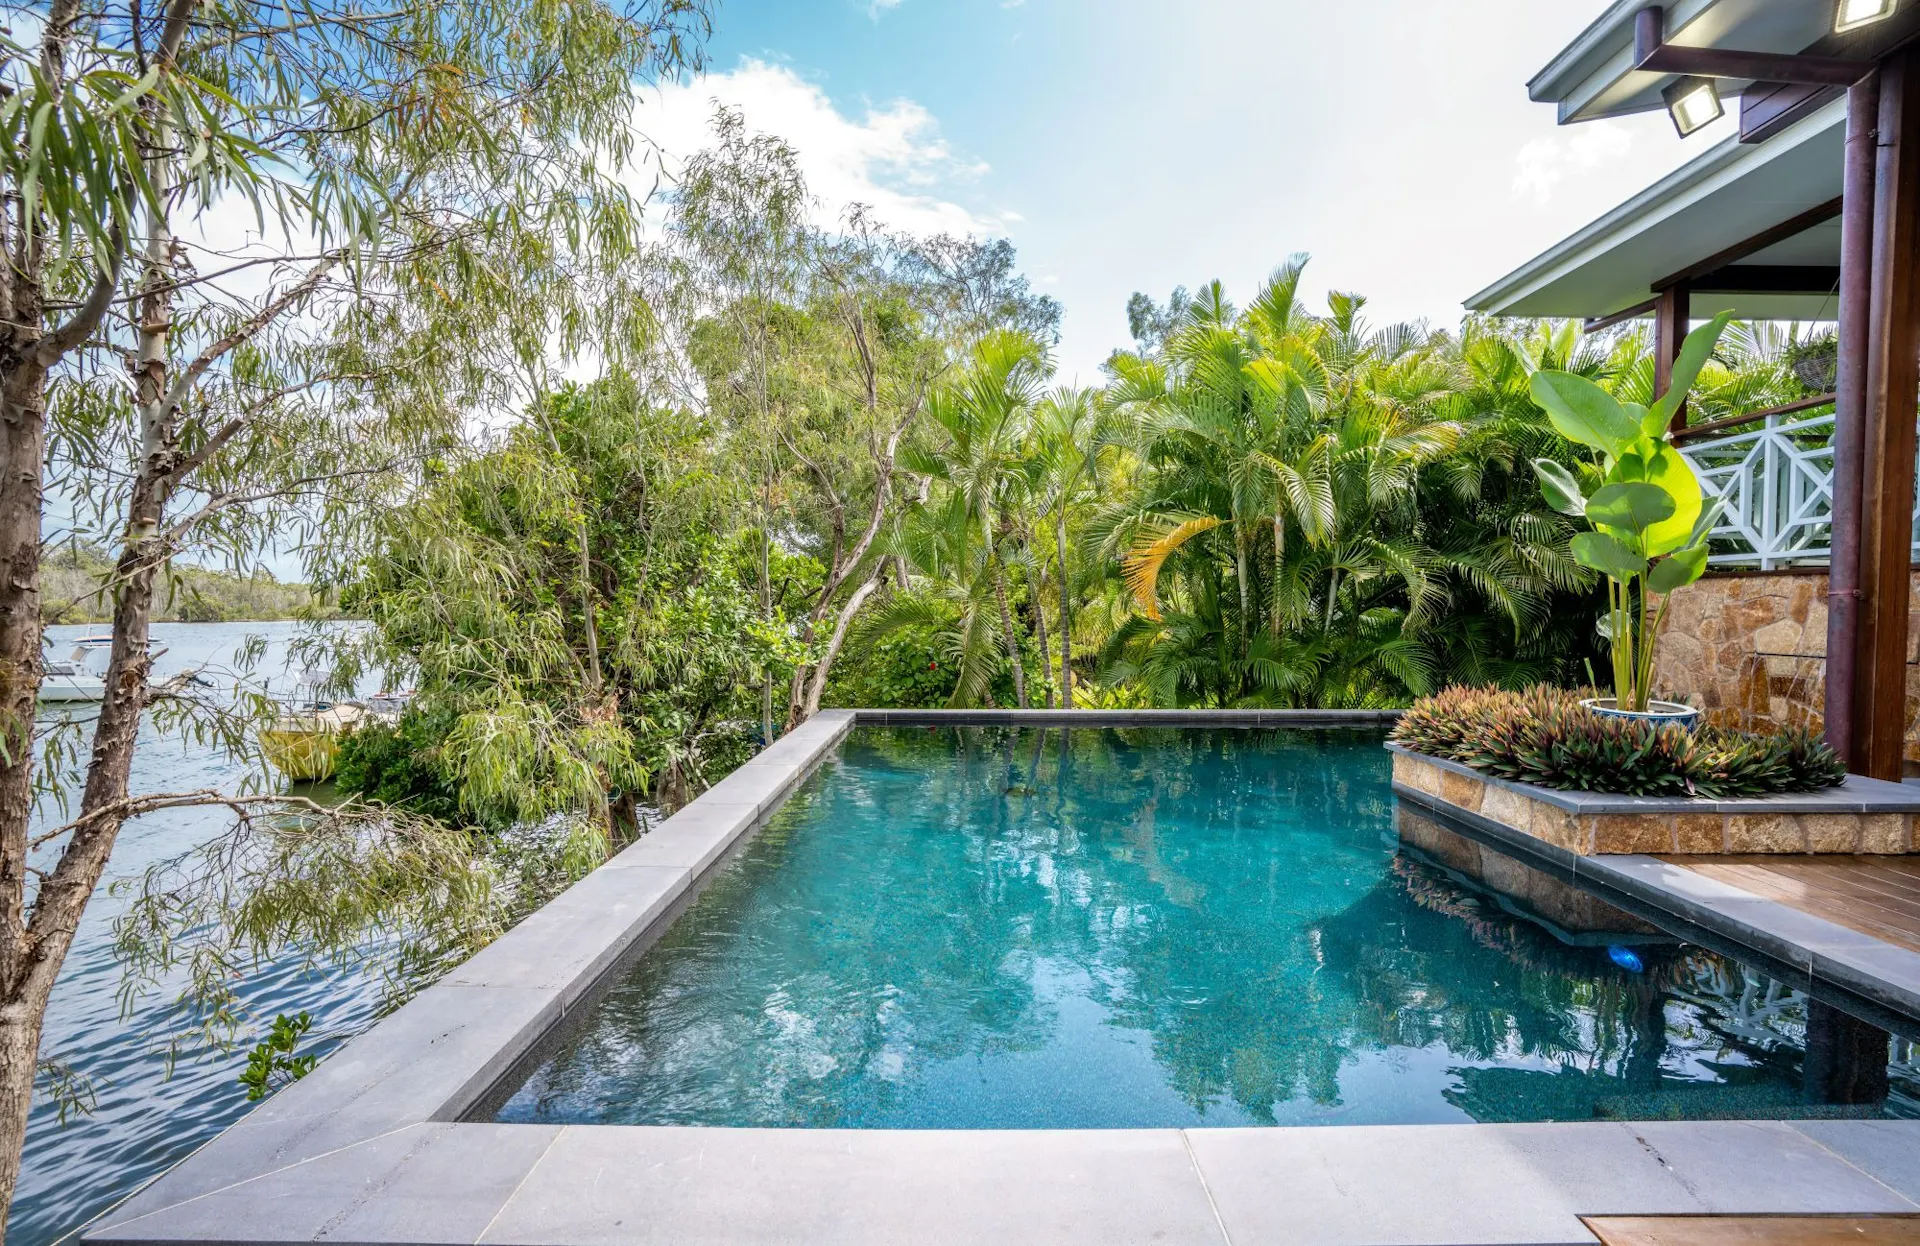 Saltwater swimming pool overlooking the Noosa River